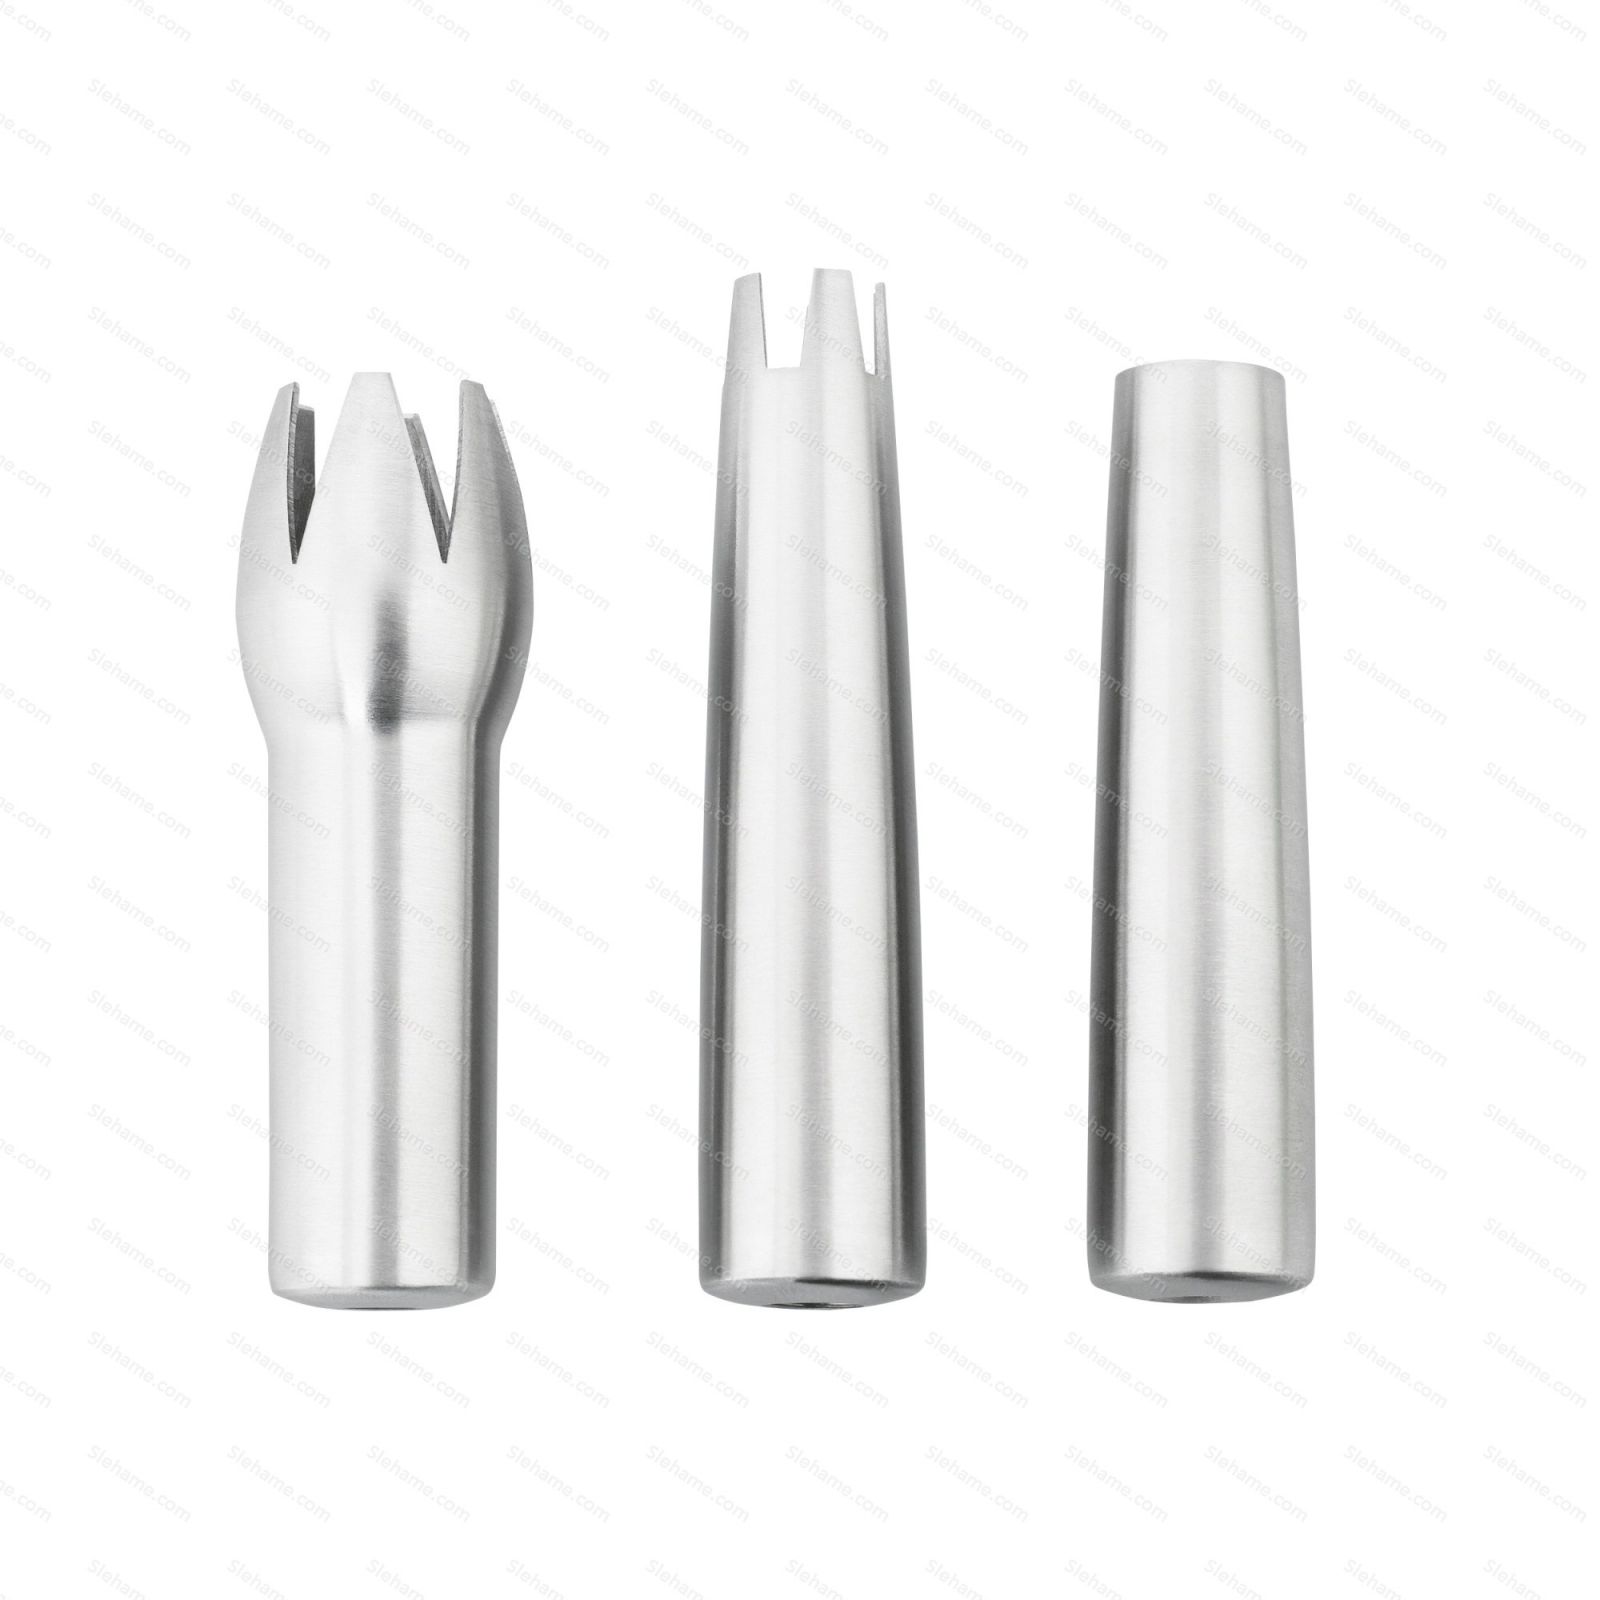 Stainless Steel Tips iSi, 3 pcs